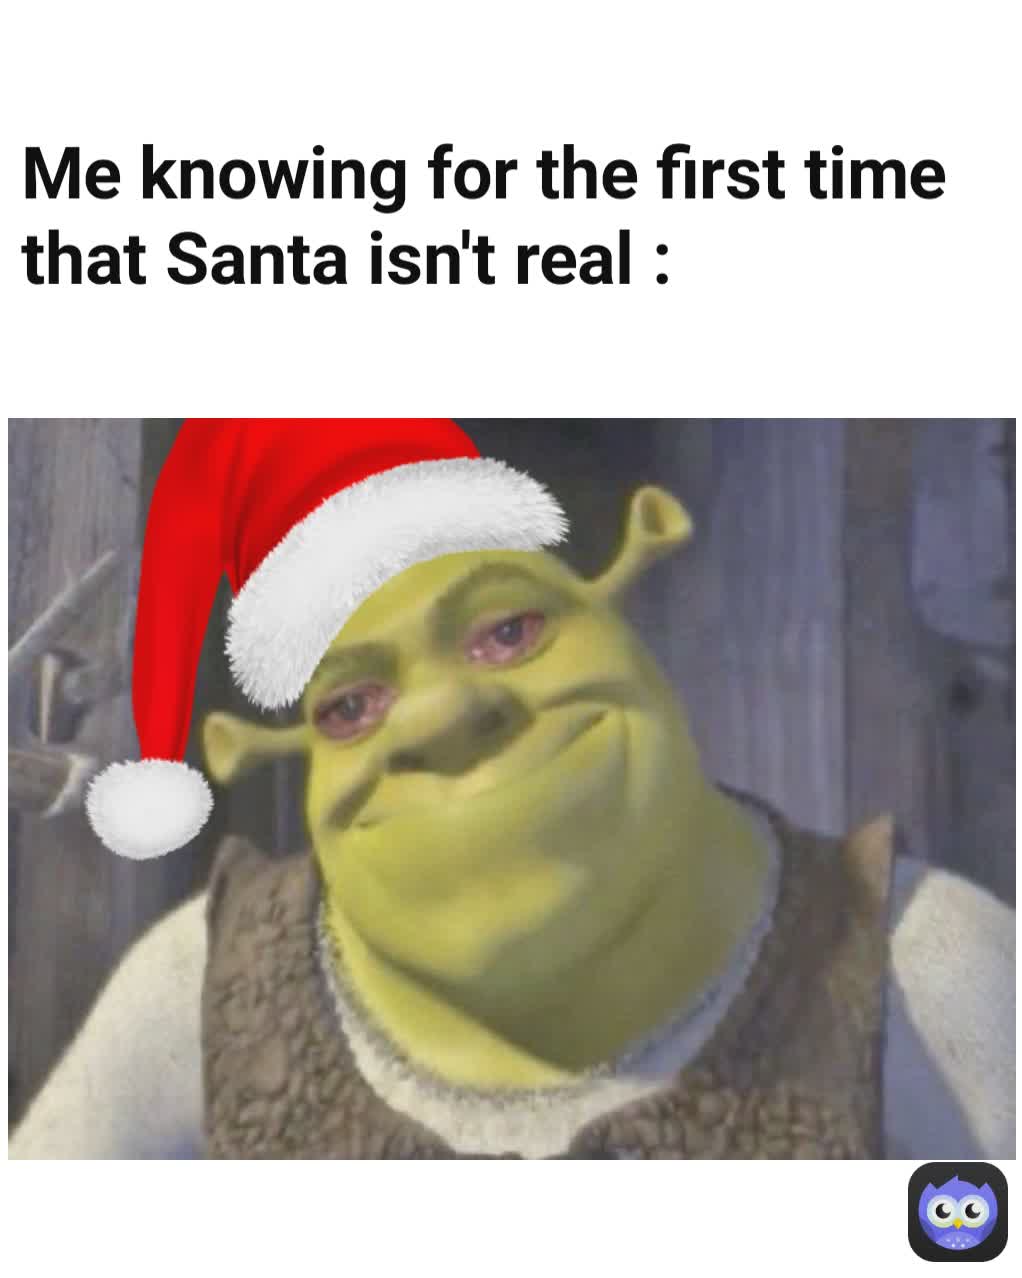 Me knowing for the first time that Santa isn't real :